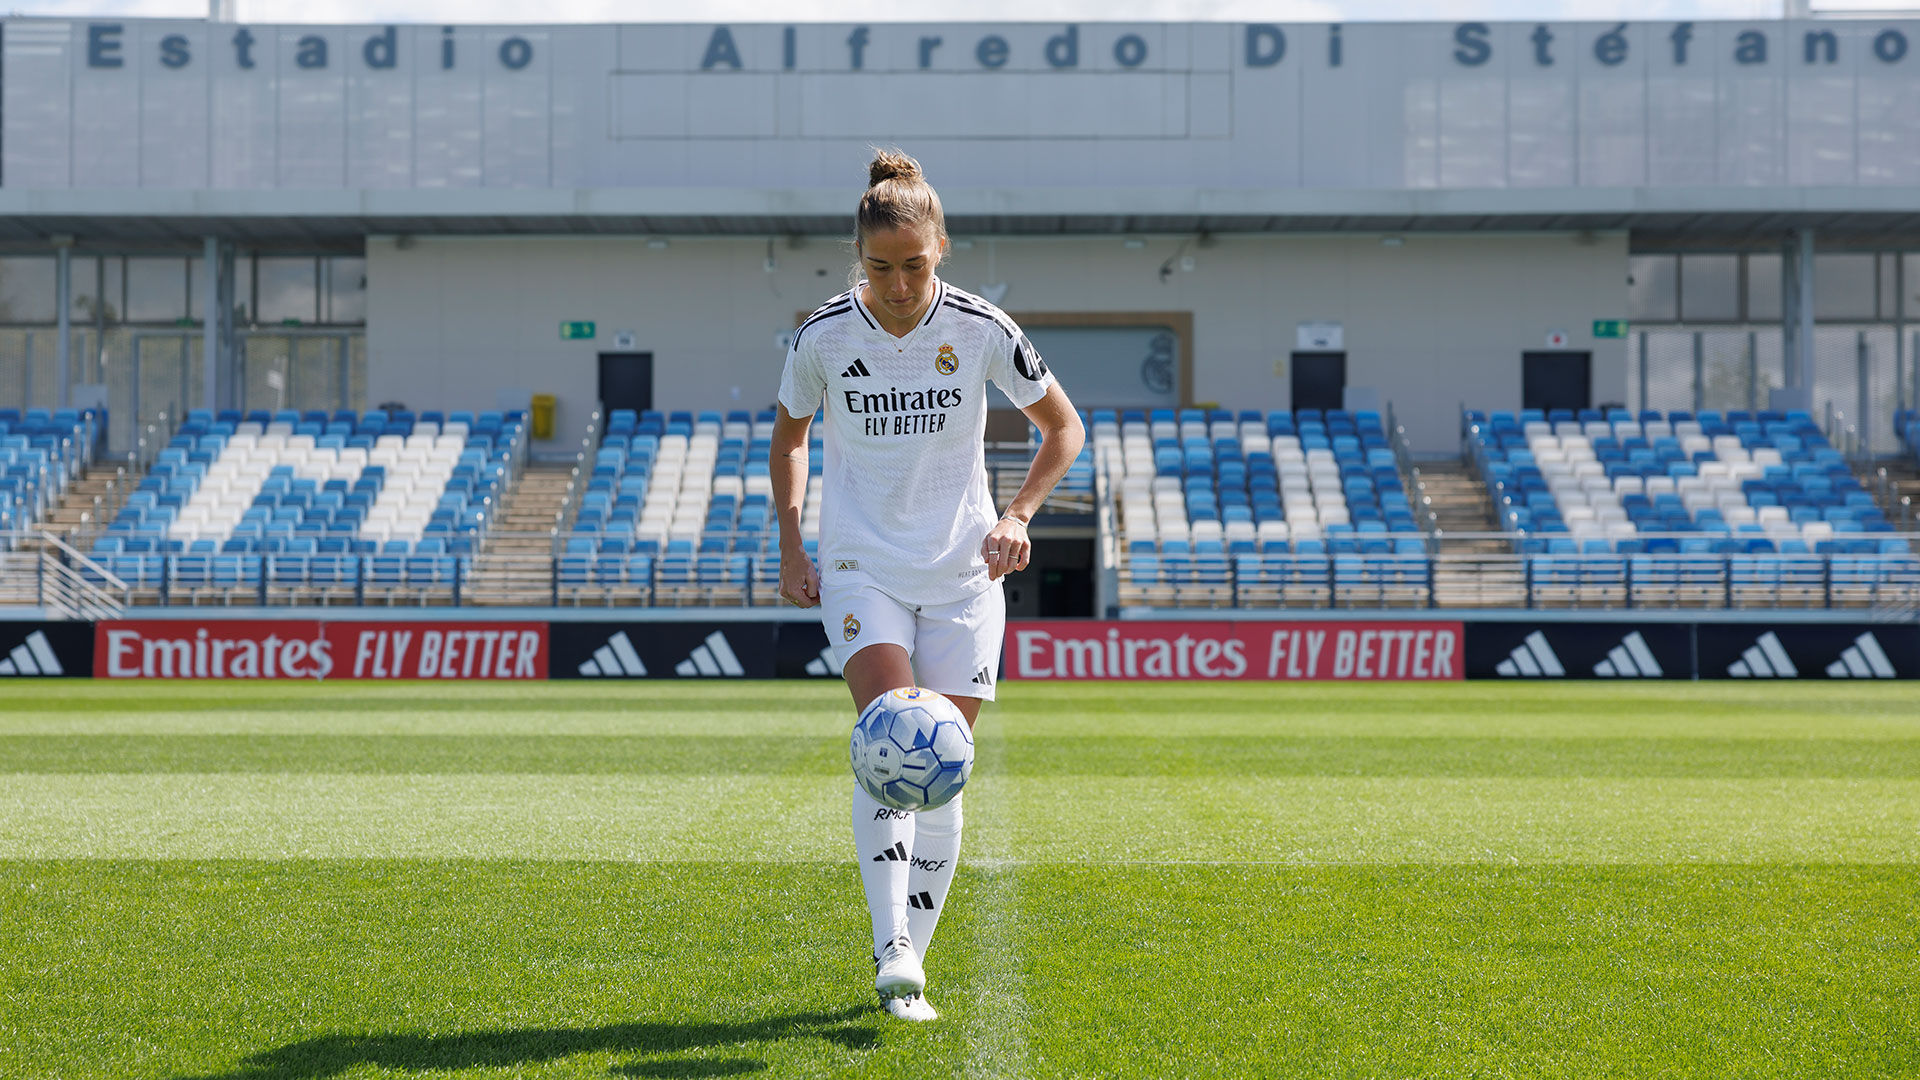 Angeldahl signs for Real Madrid